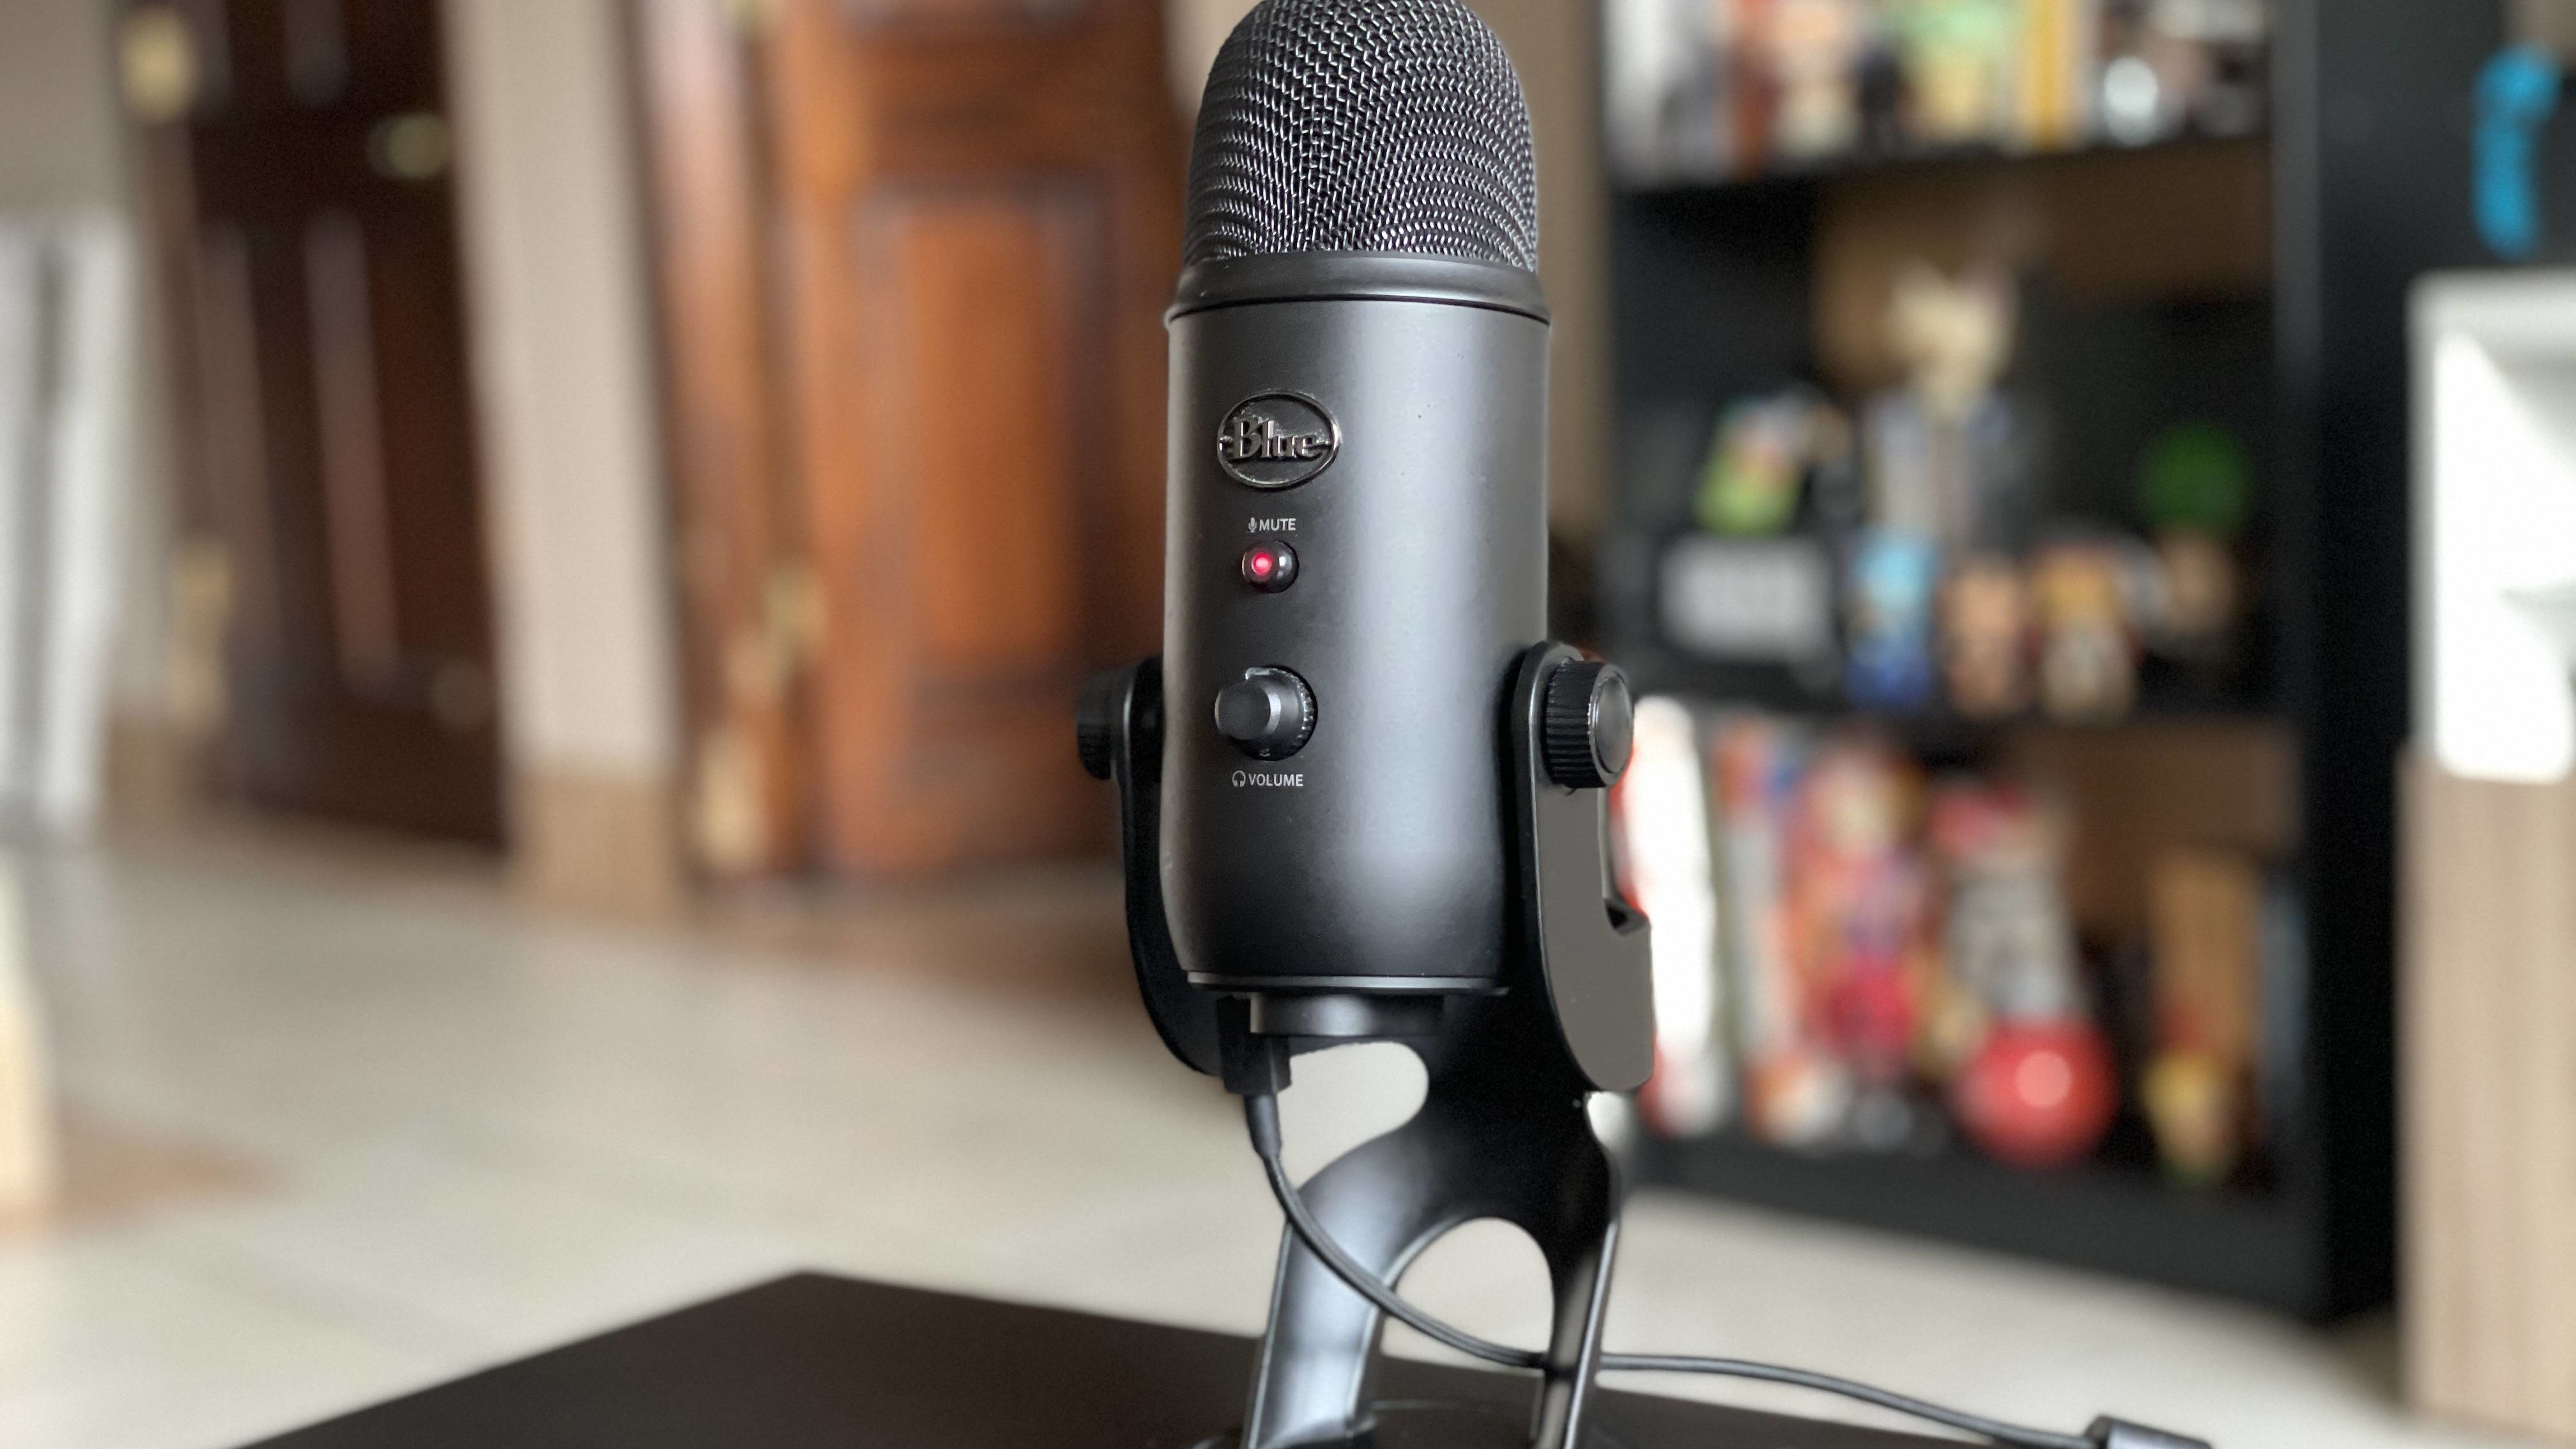 The Shure MV7 Will Be The New Go To Microphone for Podcasters., by Justin  Phillips